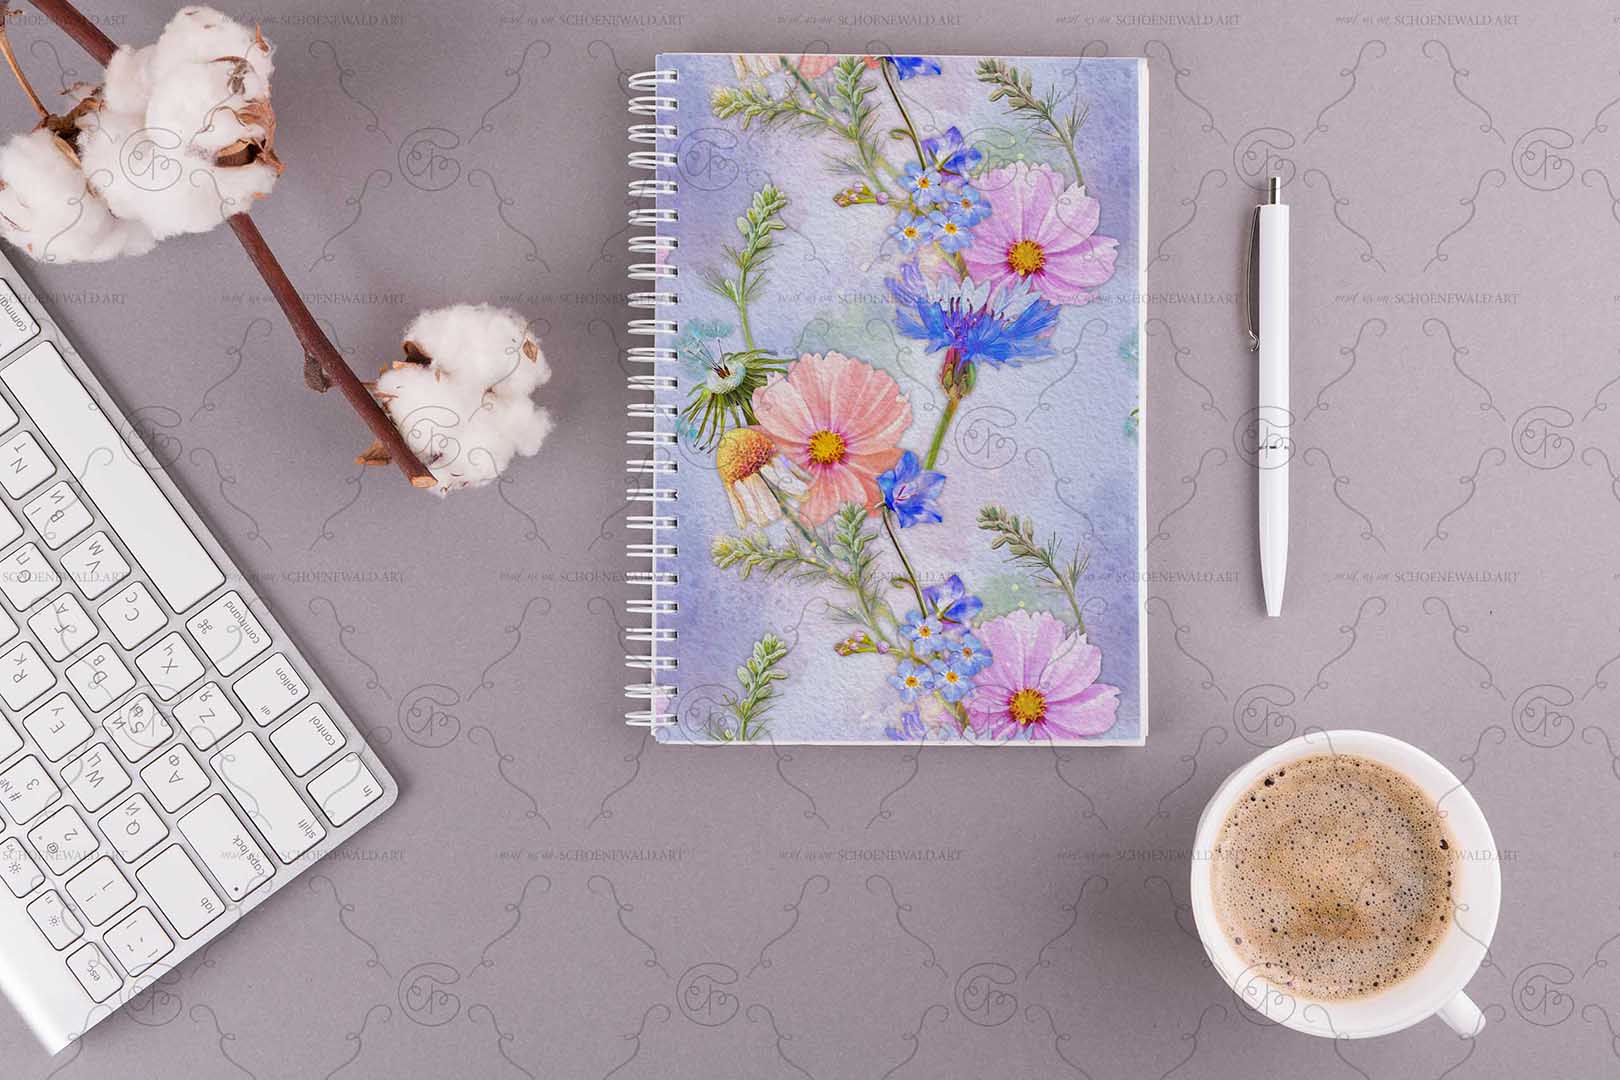 Notebook with a graphic from "Meadow Magic" set by Schoenewald.art - unique watercolor paintings of meadow flowers